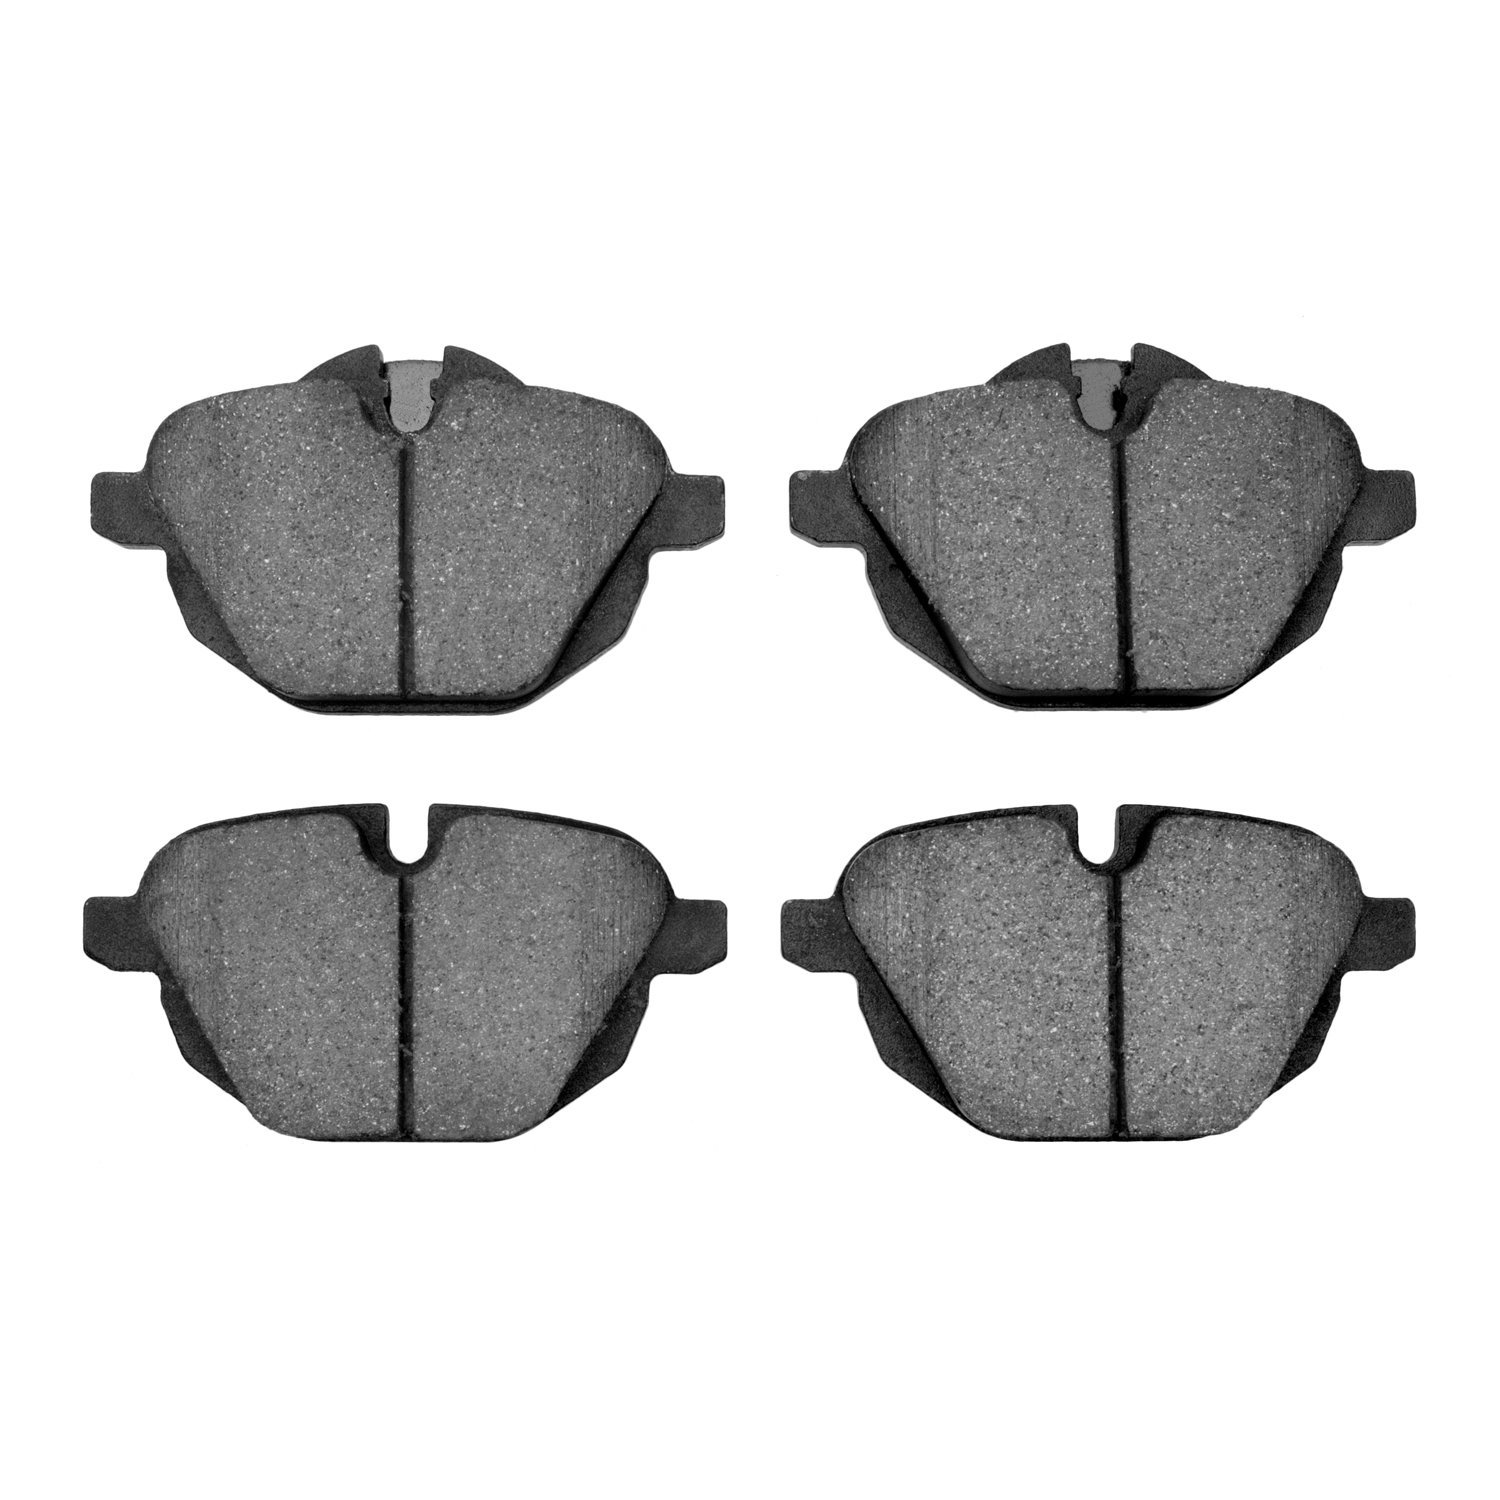 1310-1473-00 3000-Series Ceramic Brake Pads, Fits Select BMW, Position: Rear